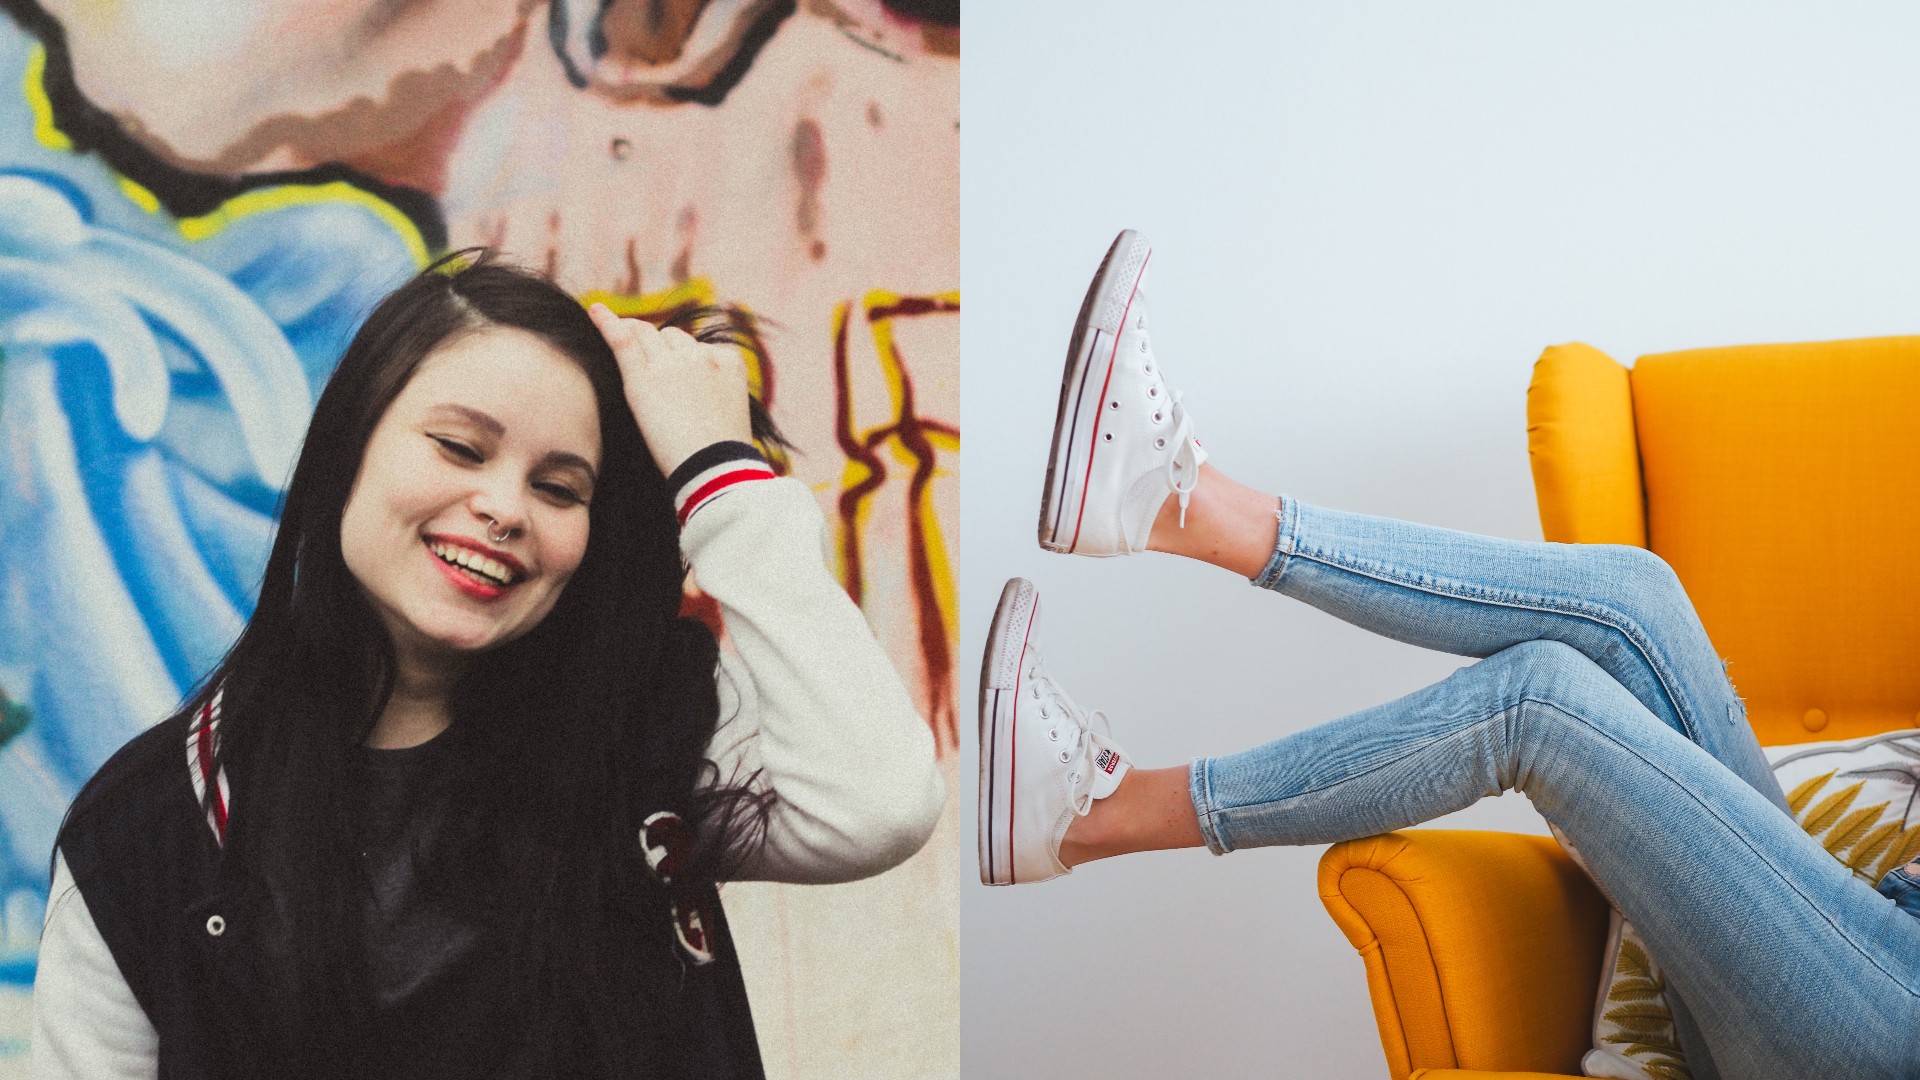 From skinny jeans to side-parting: Fashion trends that Gen Z